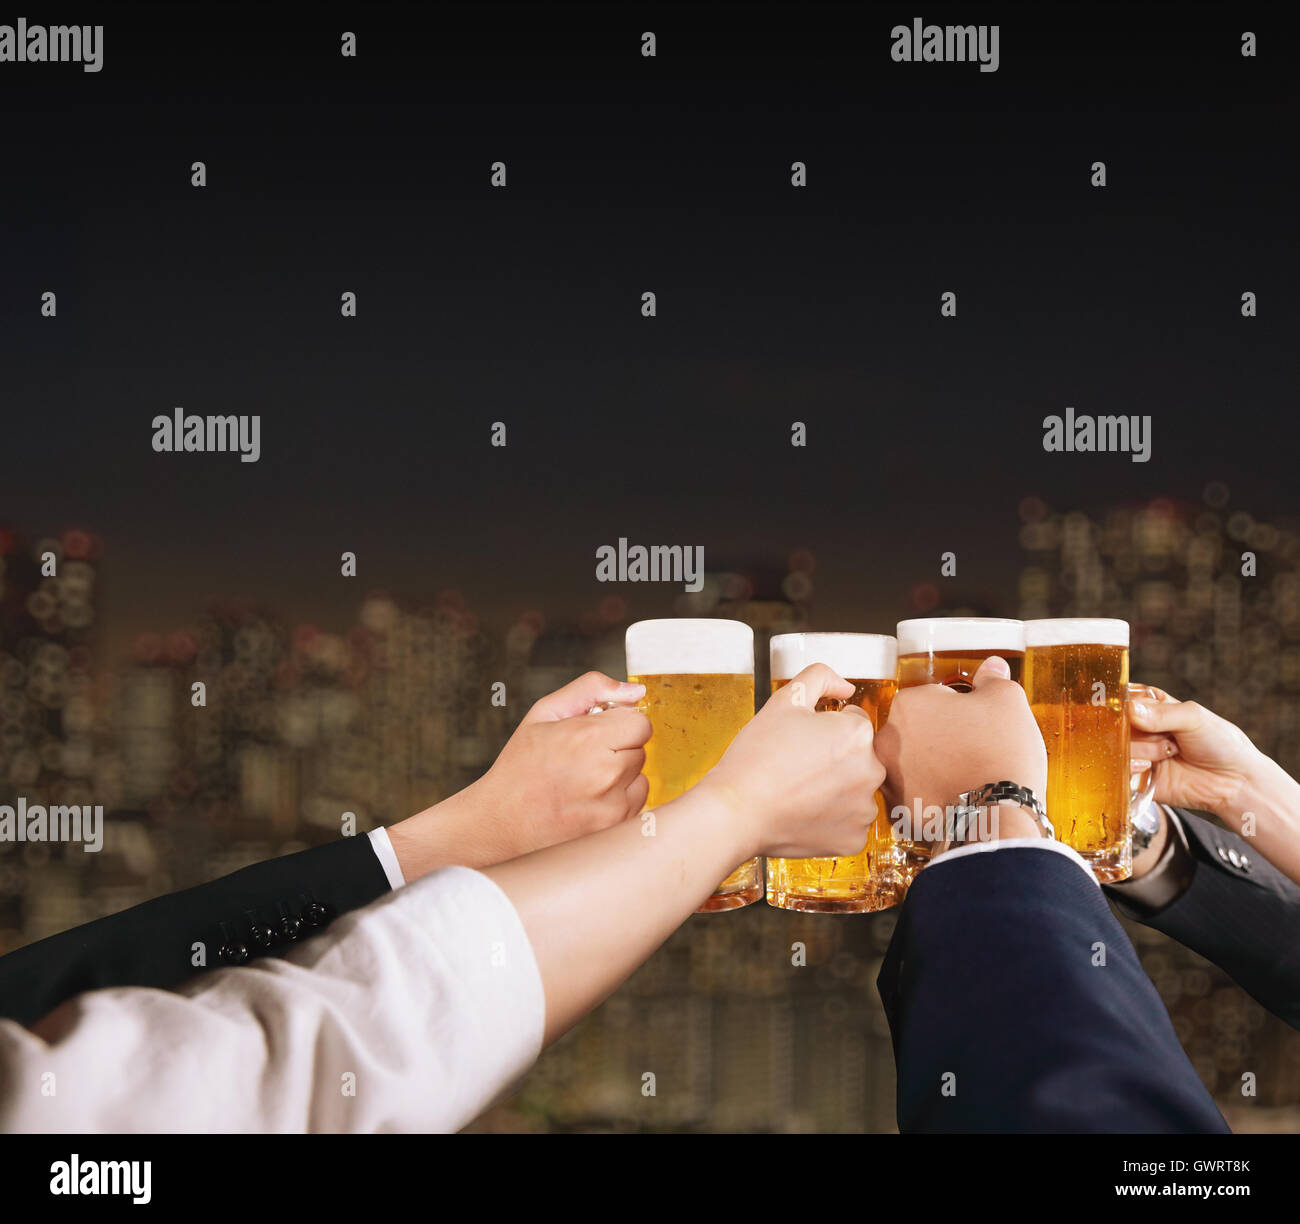 Group of young Japanese friends toasting with beer Stock Photo